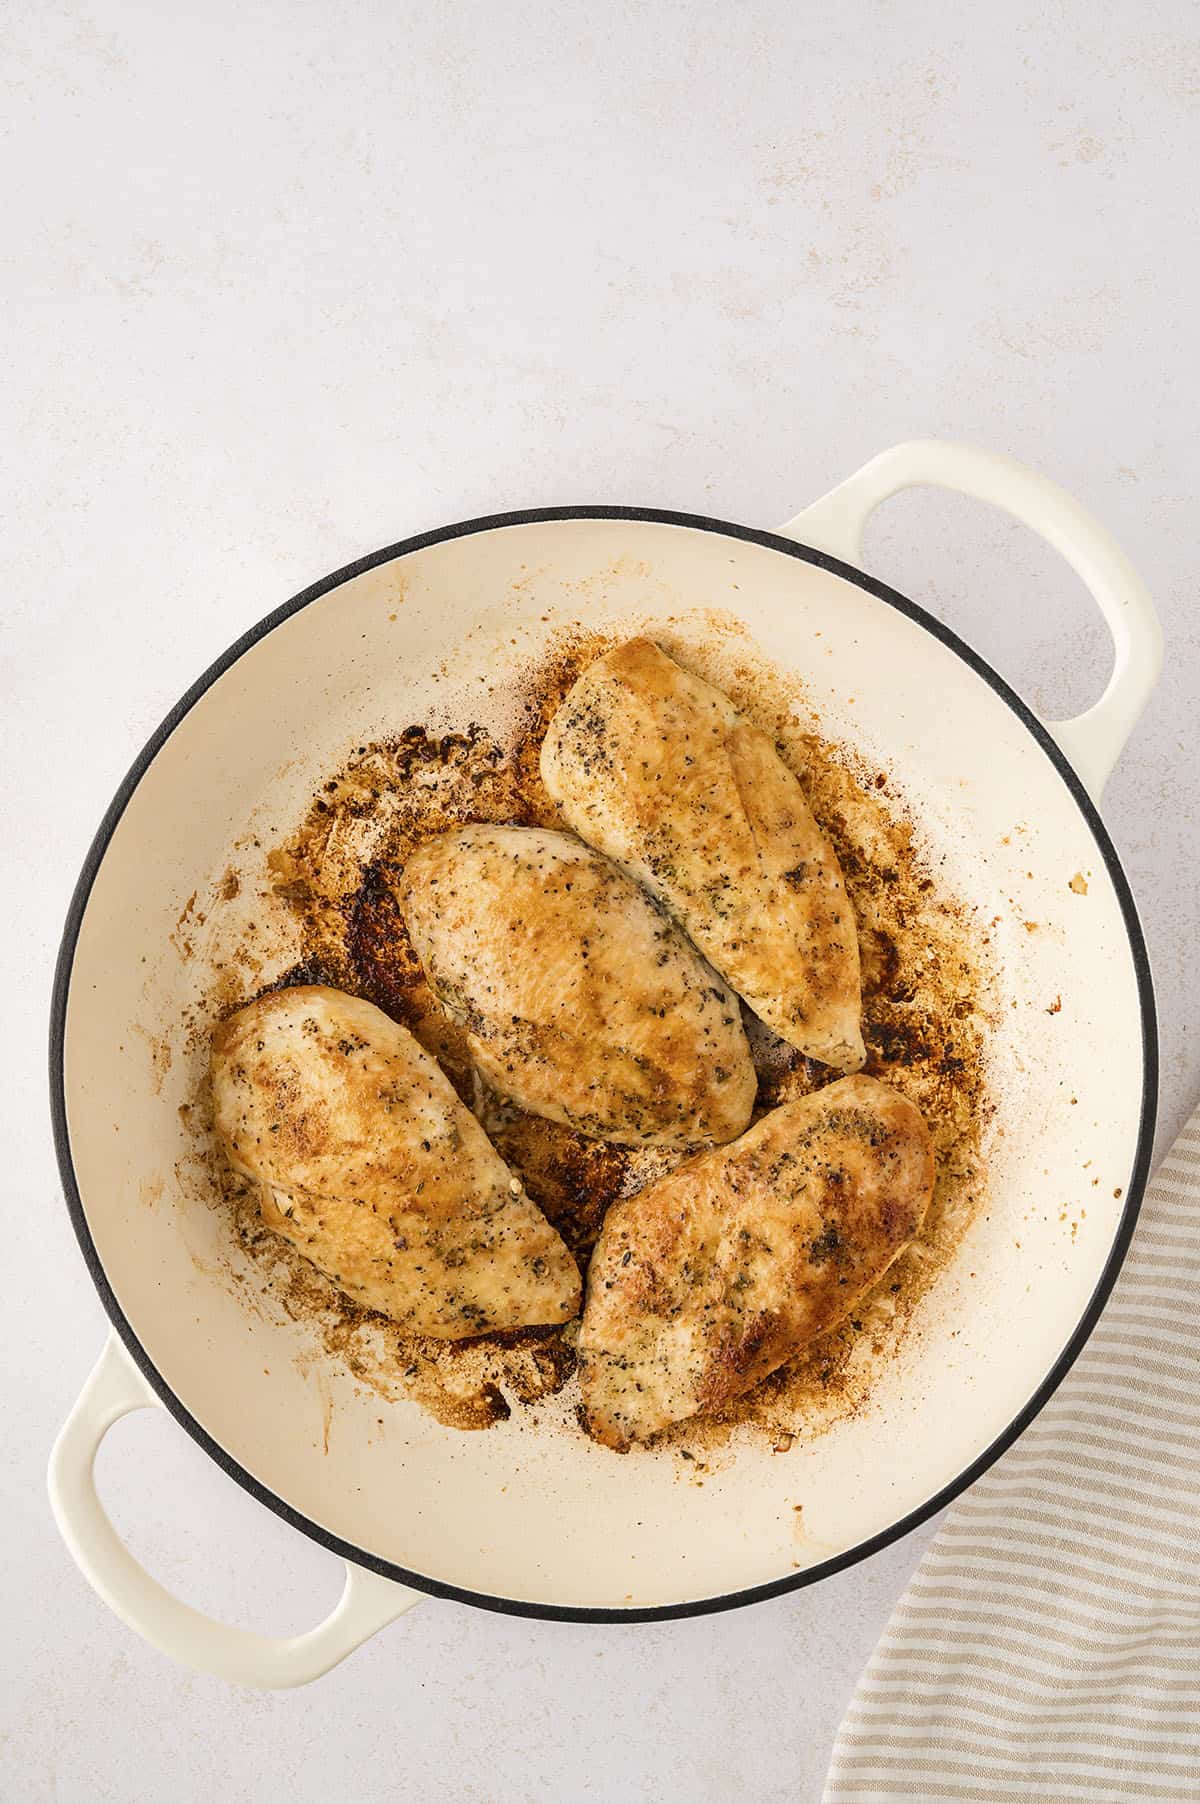 Seasoned chicken breasts cooked in white pot.